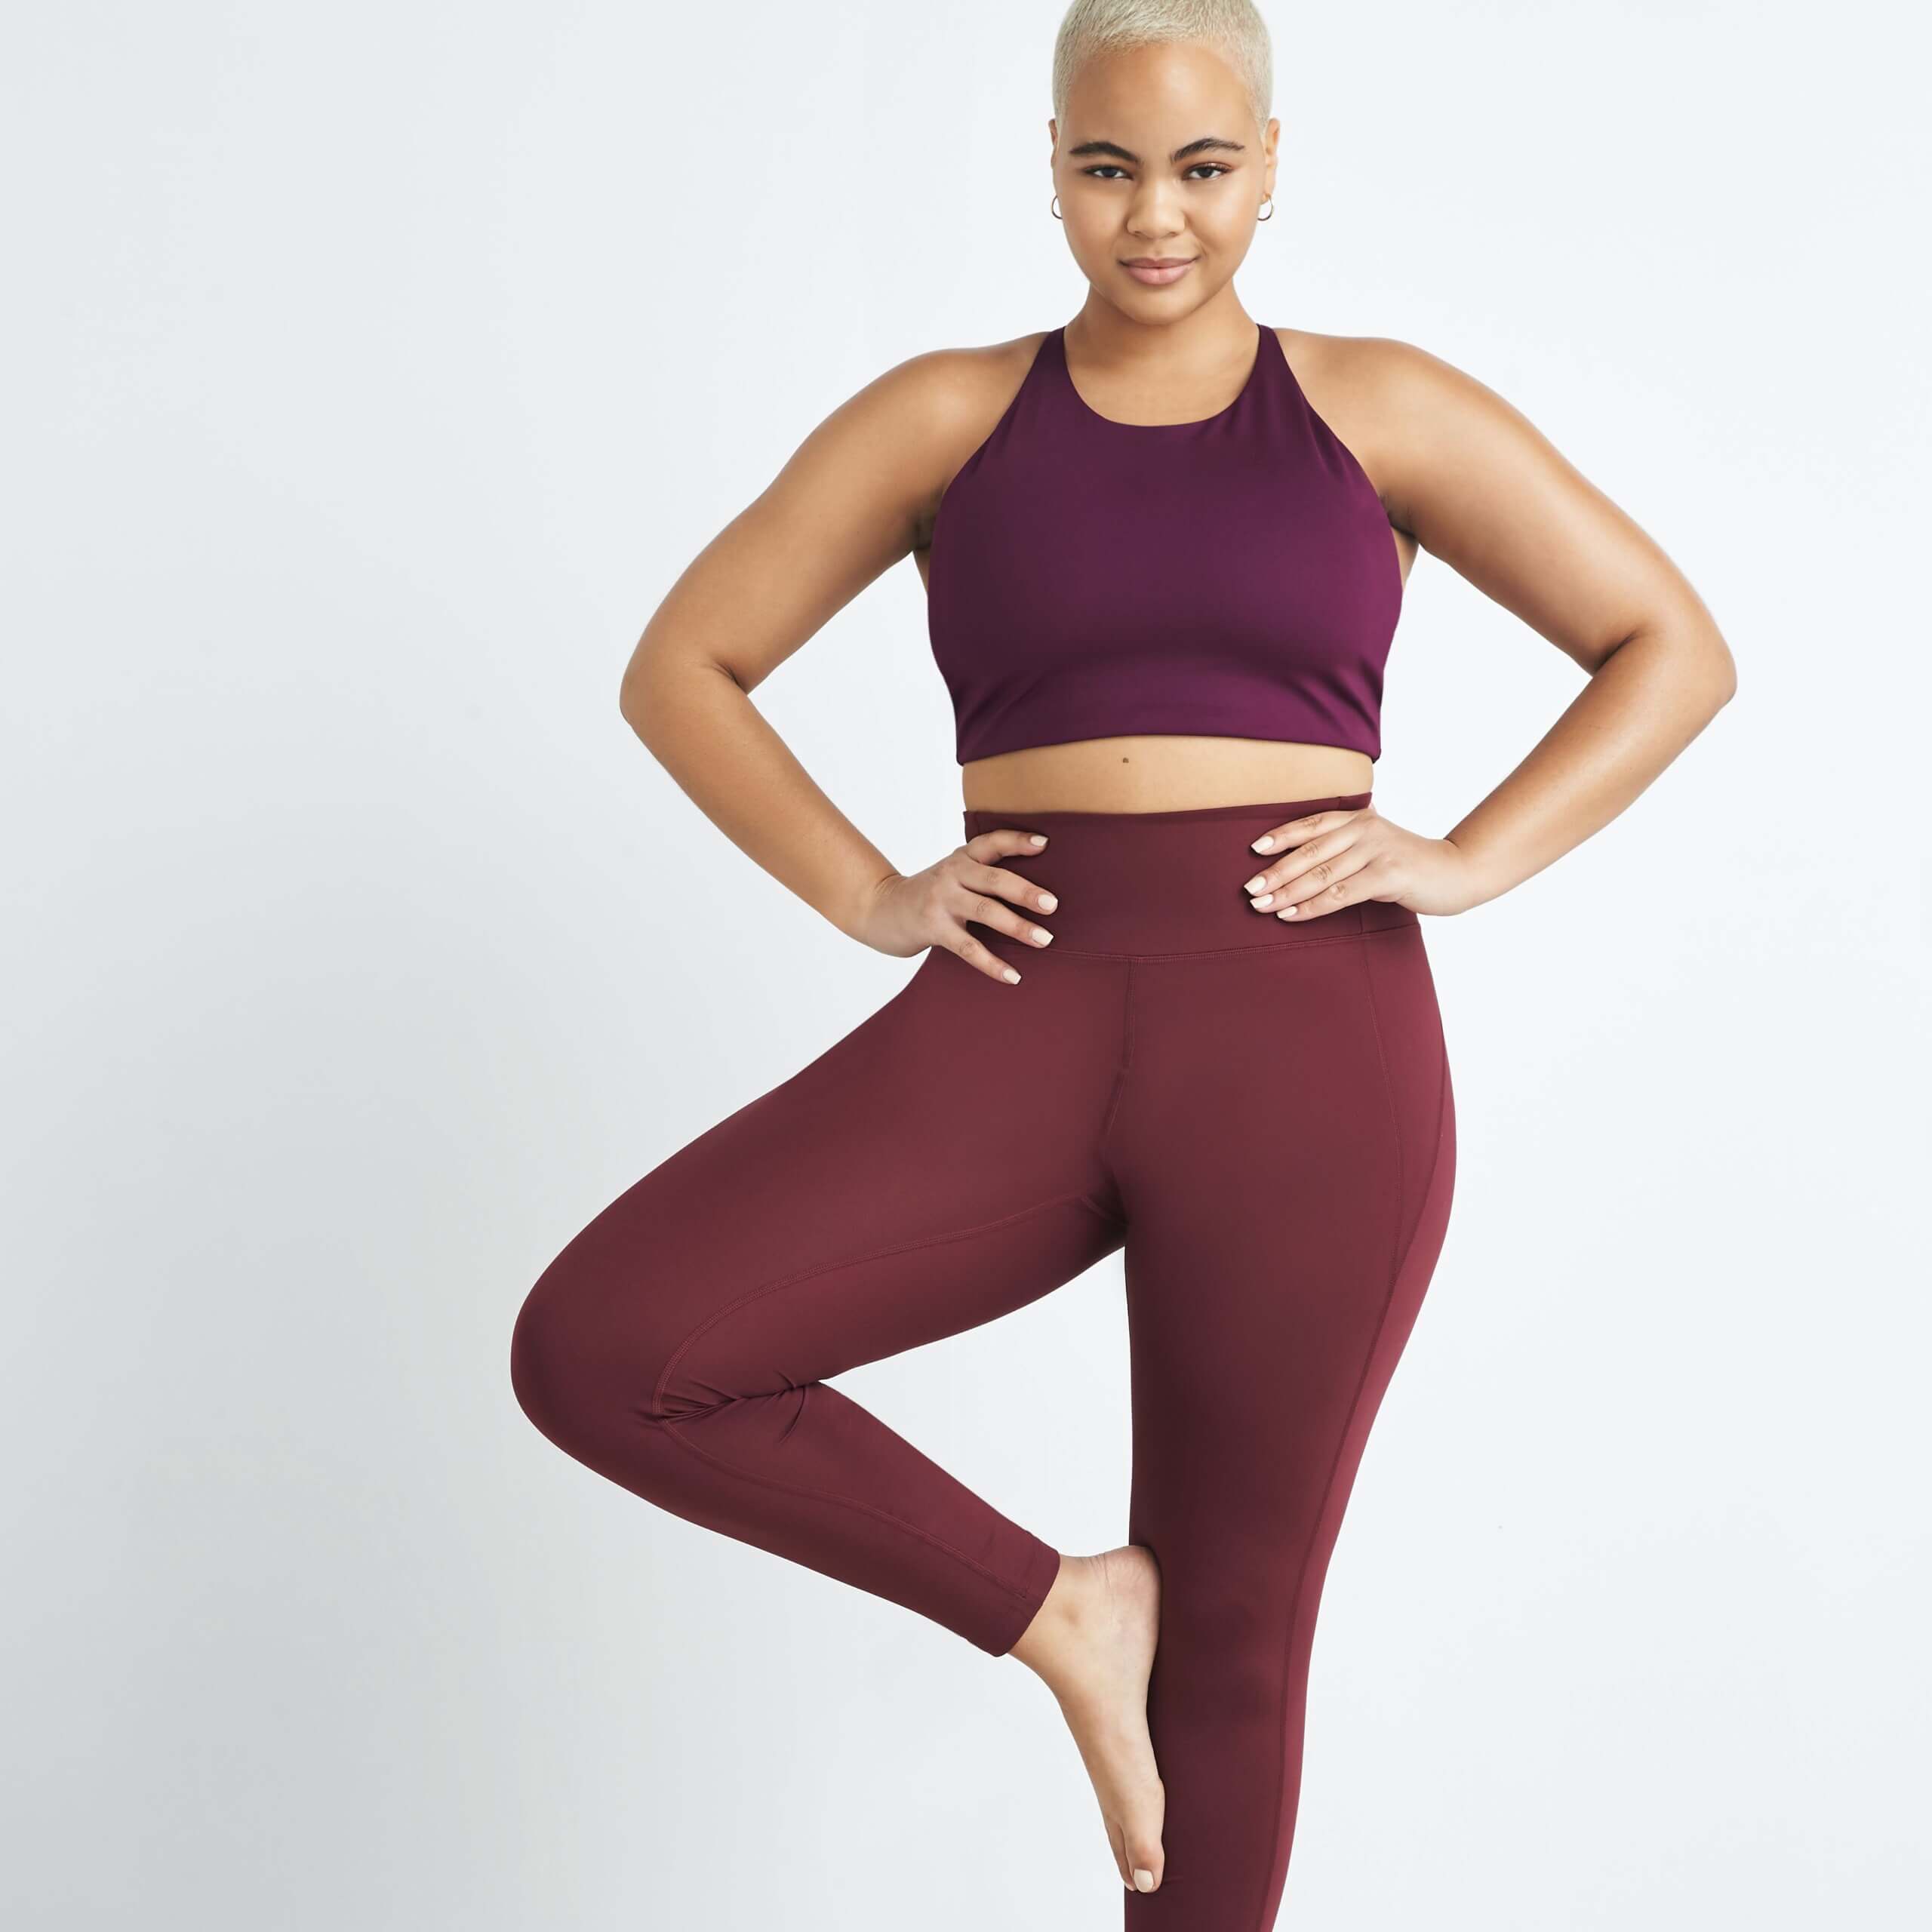 What to Wear and What Not to Wear to Yoga Class